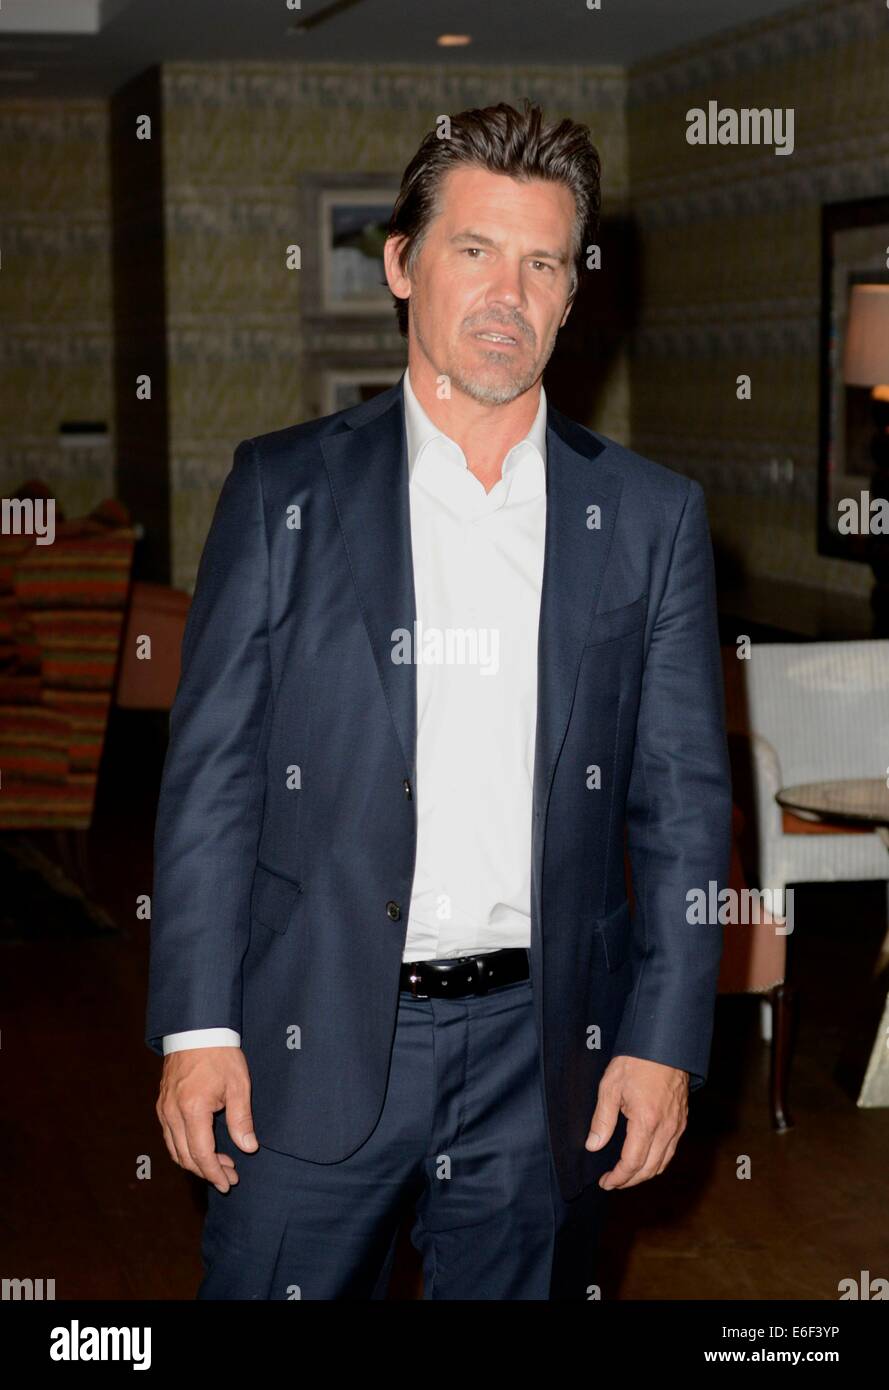 New York, NY, USA. 21st Aug, 2014. Josh Brolin in attendance for SIN CITY: A DAME TO KILL FOR Photo Opportunity, Crosby Street Hotel, New York, NY August 21, 2014. © Derek Storm/Everett Collection/Alamy Live News Stock Photo